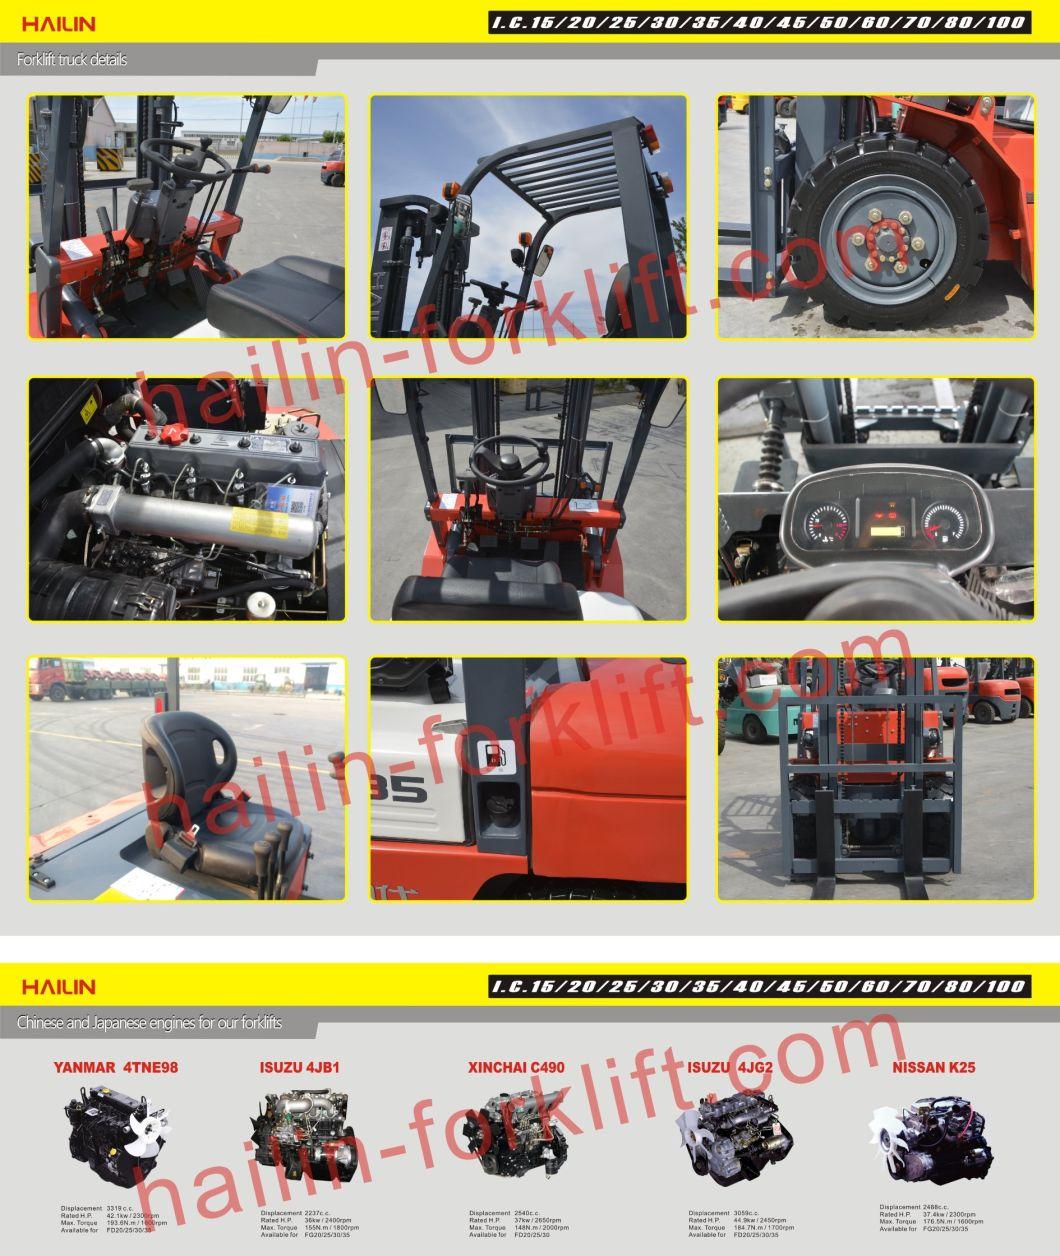 Hailin in Stock Factory Price Euro 3 Euro 5 EPA Diesel Forklift Truck 2 Ton 3 Ton 5 Ton 7 Ton 8 Ton 10 Ton Forklift with Japanese Engine Side Shift and CE